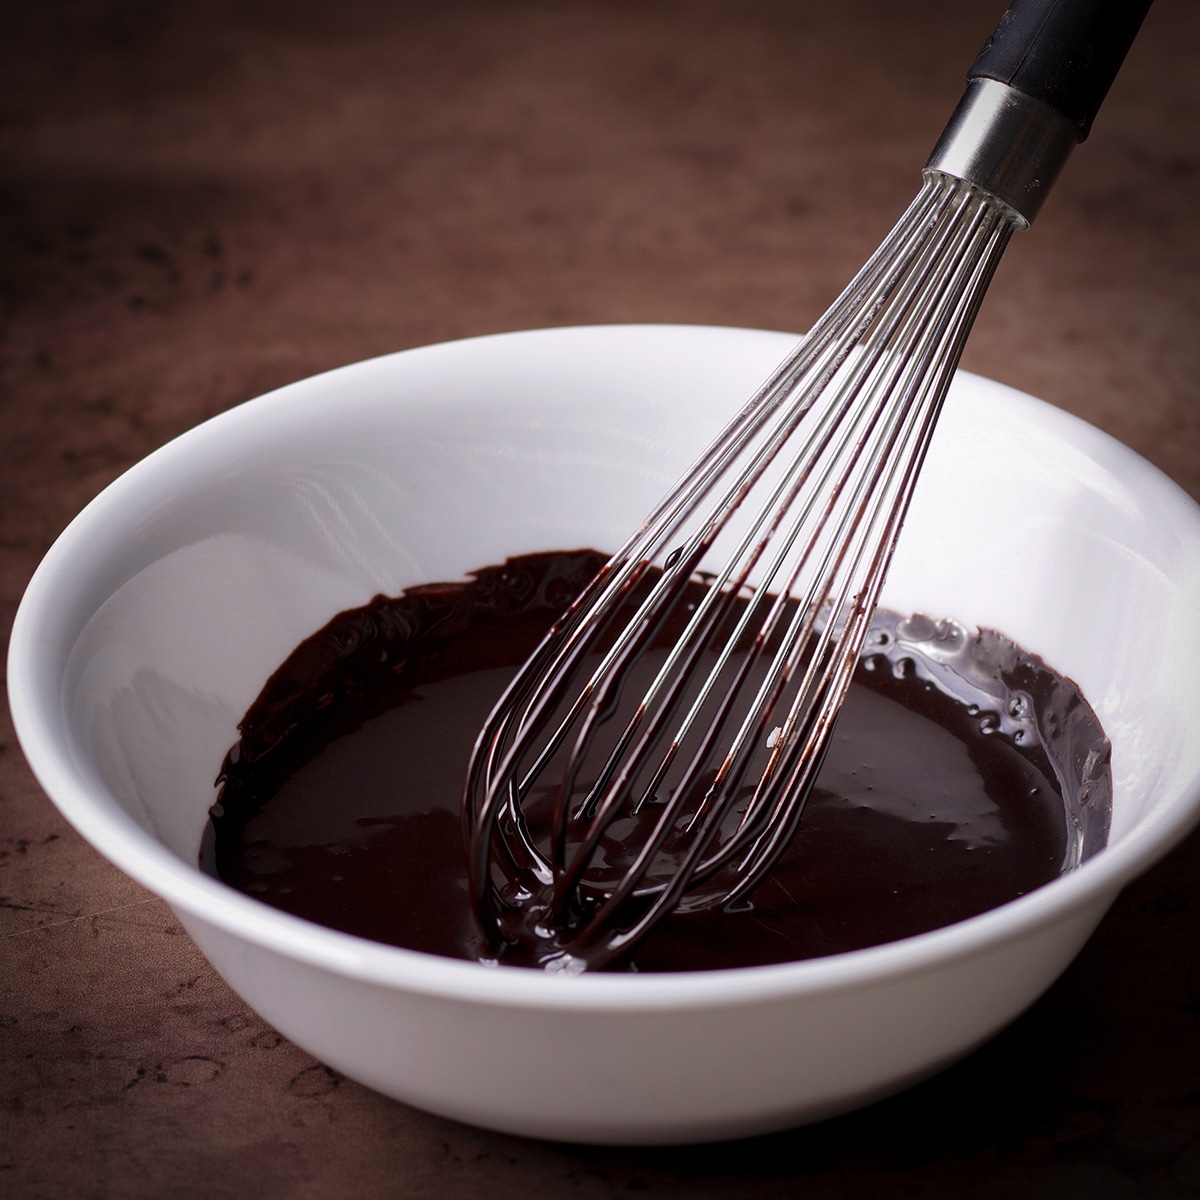 Someone using a wire whisk to mix up a simple chocolate glaze for double chocolate banana muffins.